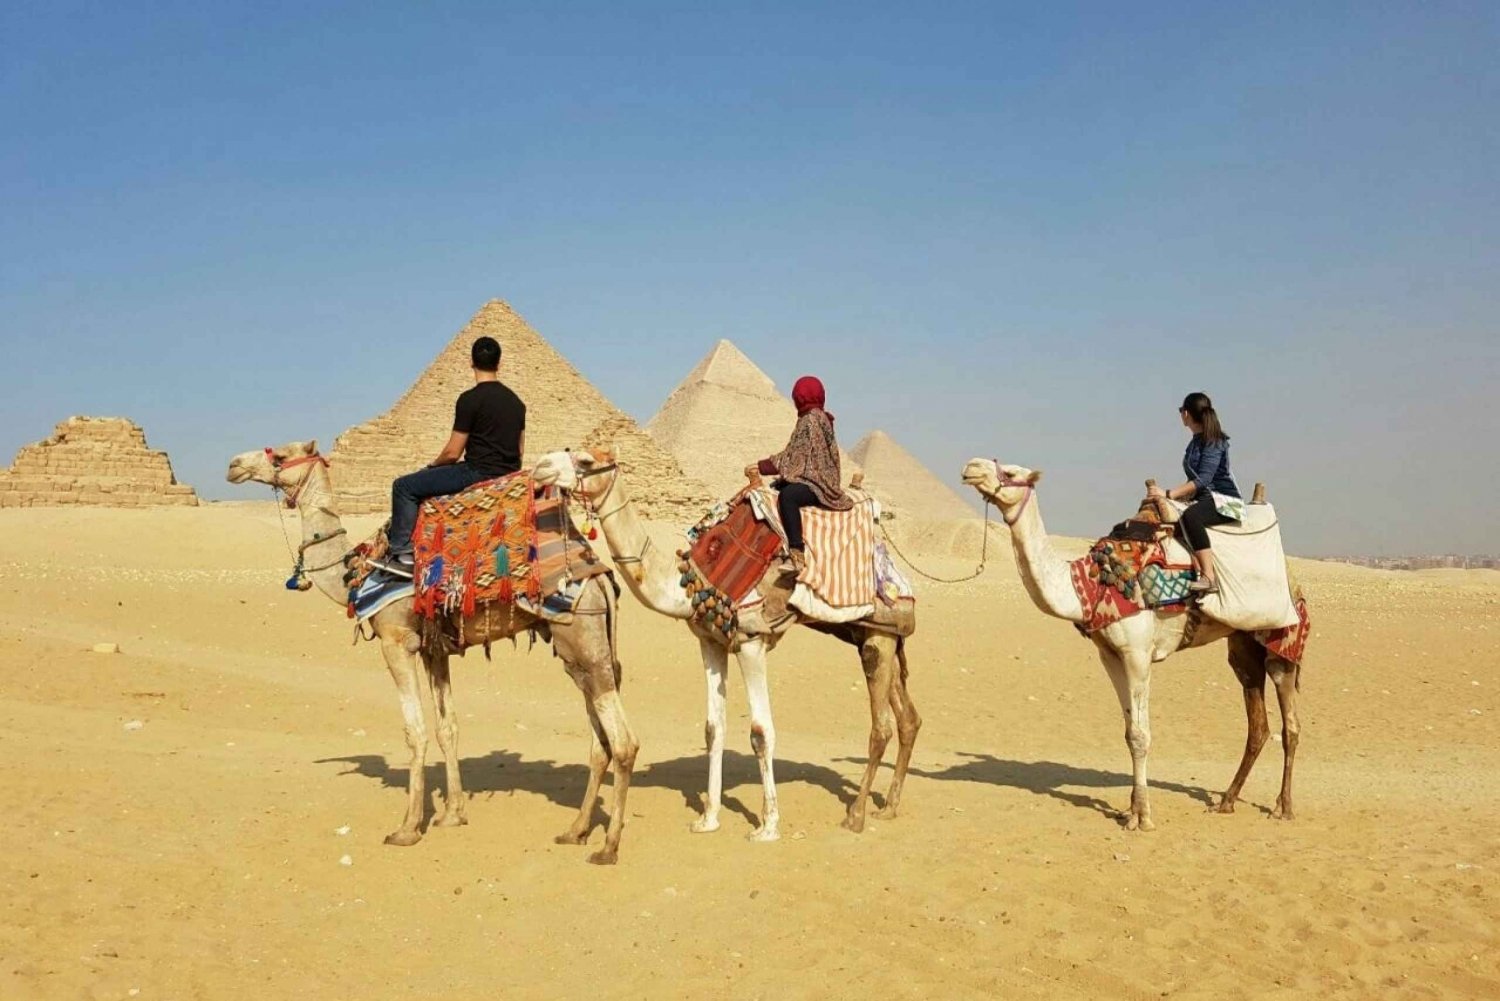 From Hurghada: 2-Day Trip to Cairo by Plane